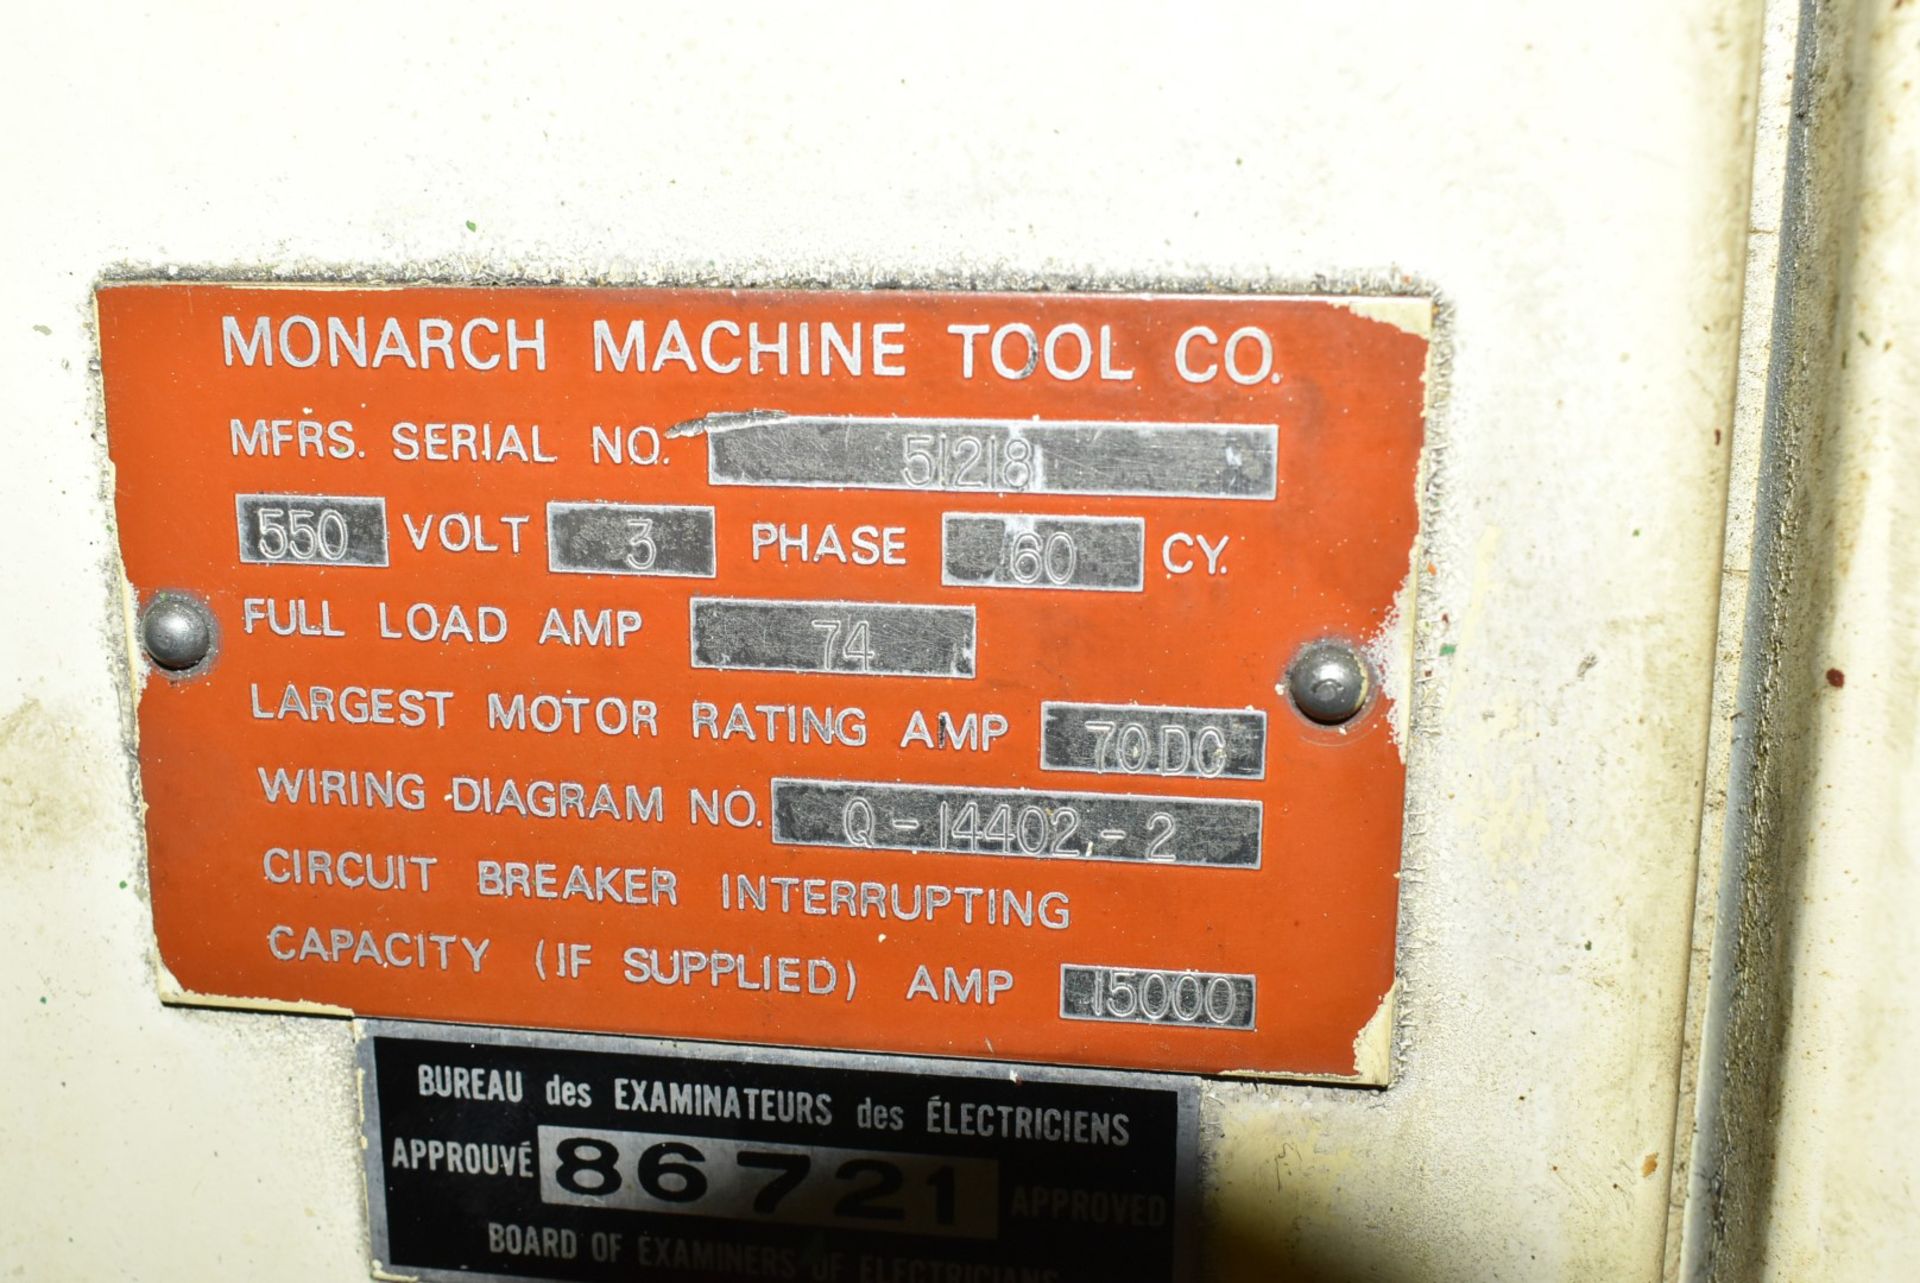 MONARCH PATHFINDER CNC ENGINE LATHE WITH GENERAL NUMERIC GN3 CNC CONTROL, 32" SWING OVER BED, 135" - Image 10 of 10